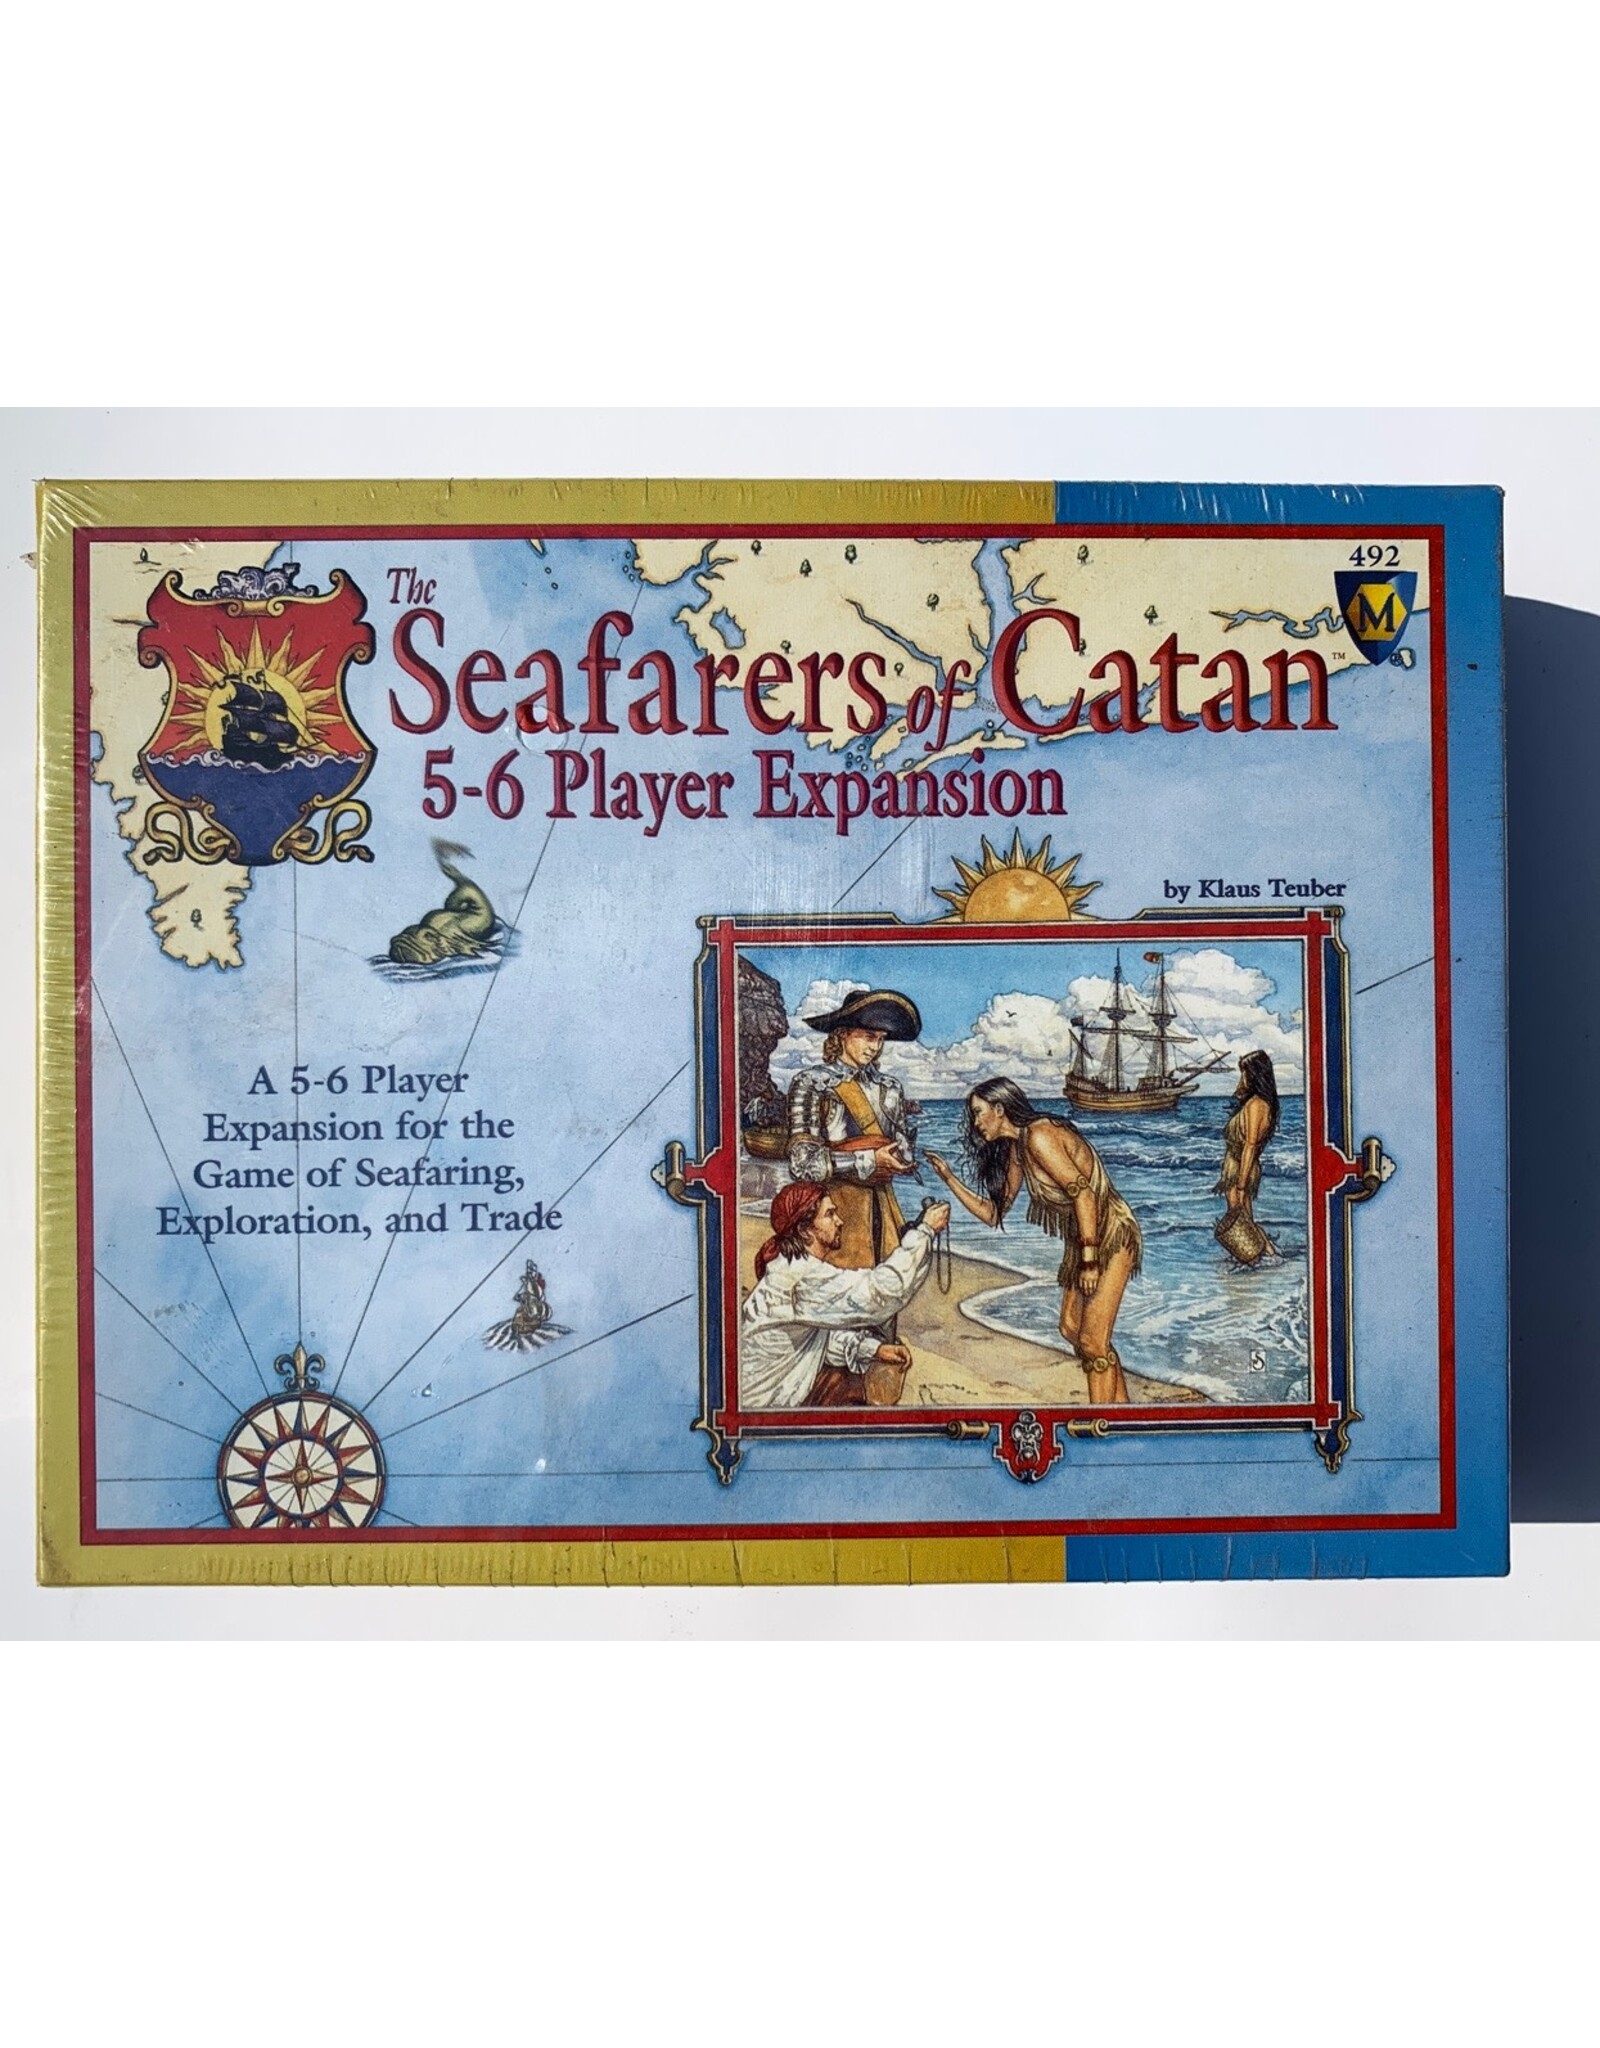 Mayfair The Seafarers of Catan: 5-6 Player Expansion ‐ English First Edition (1999) - NIS